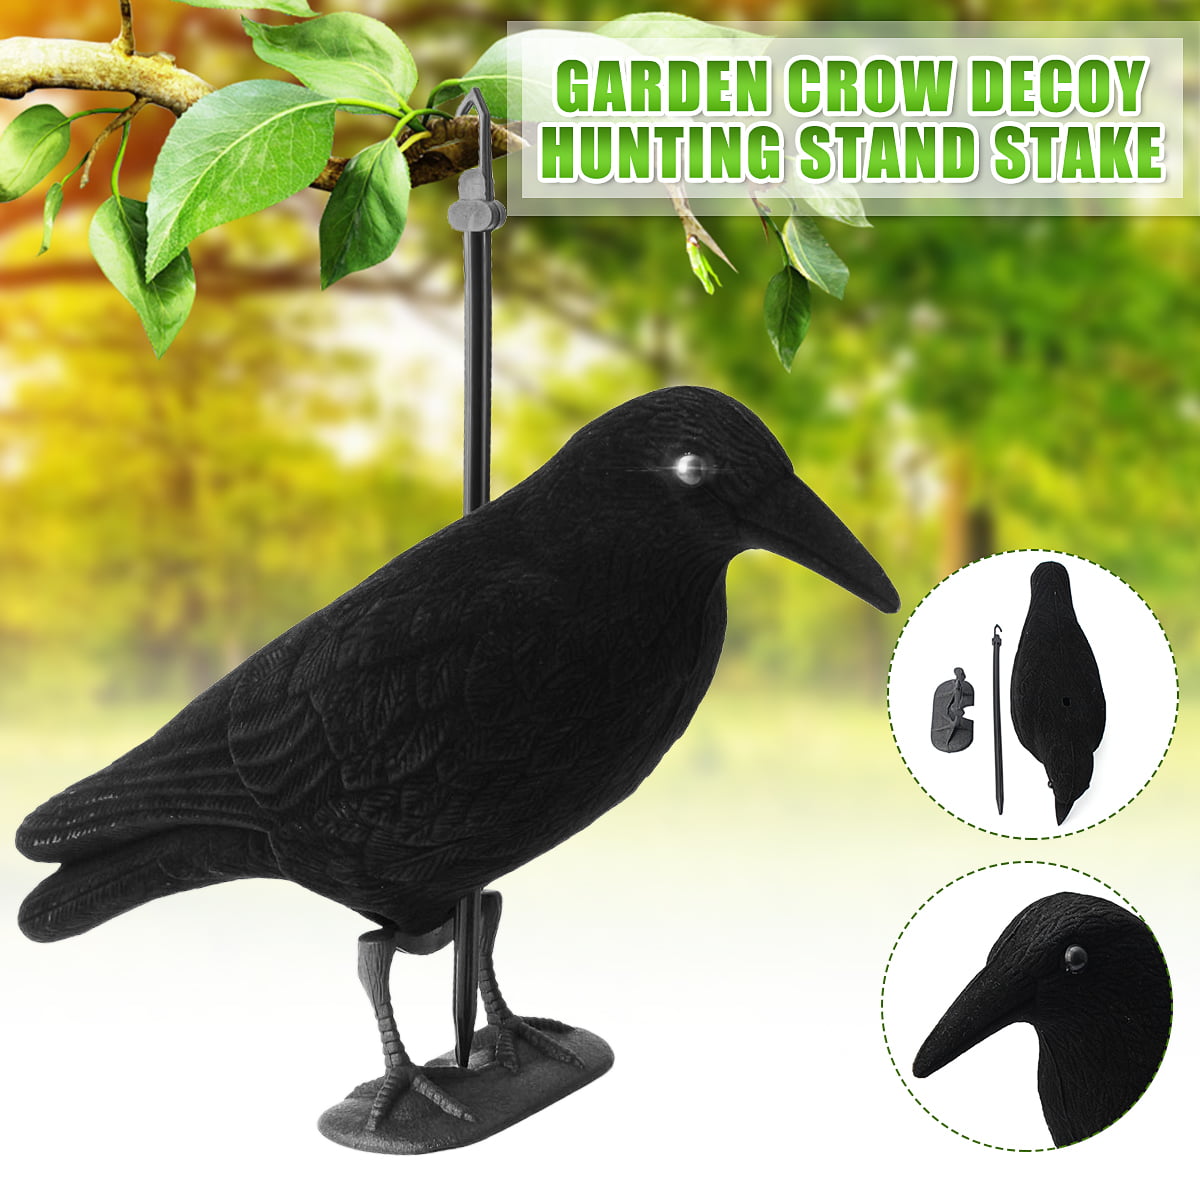 Black Flambeau Outdoors Hard Body Crow Specialty Decoy 12-Pack Hunting Decoys 